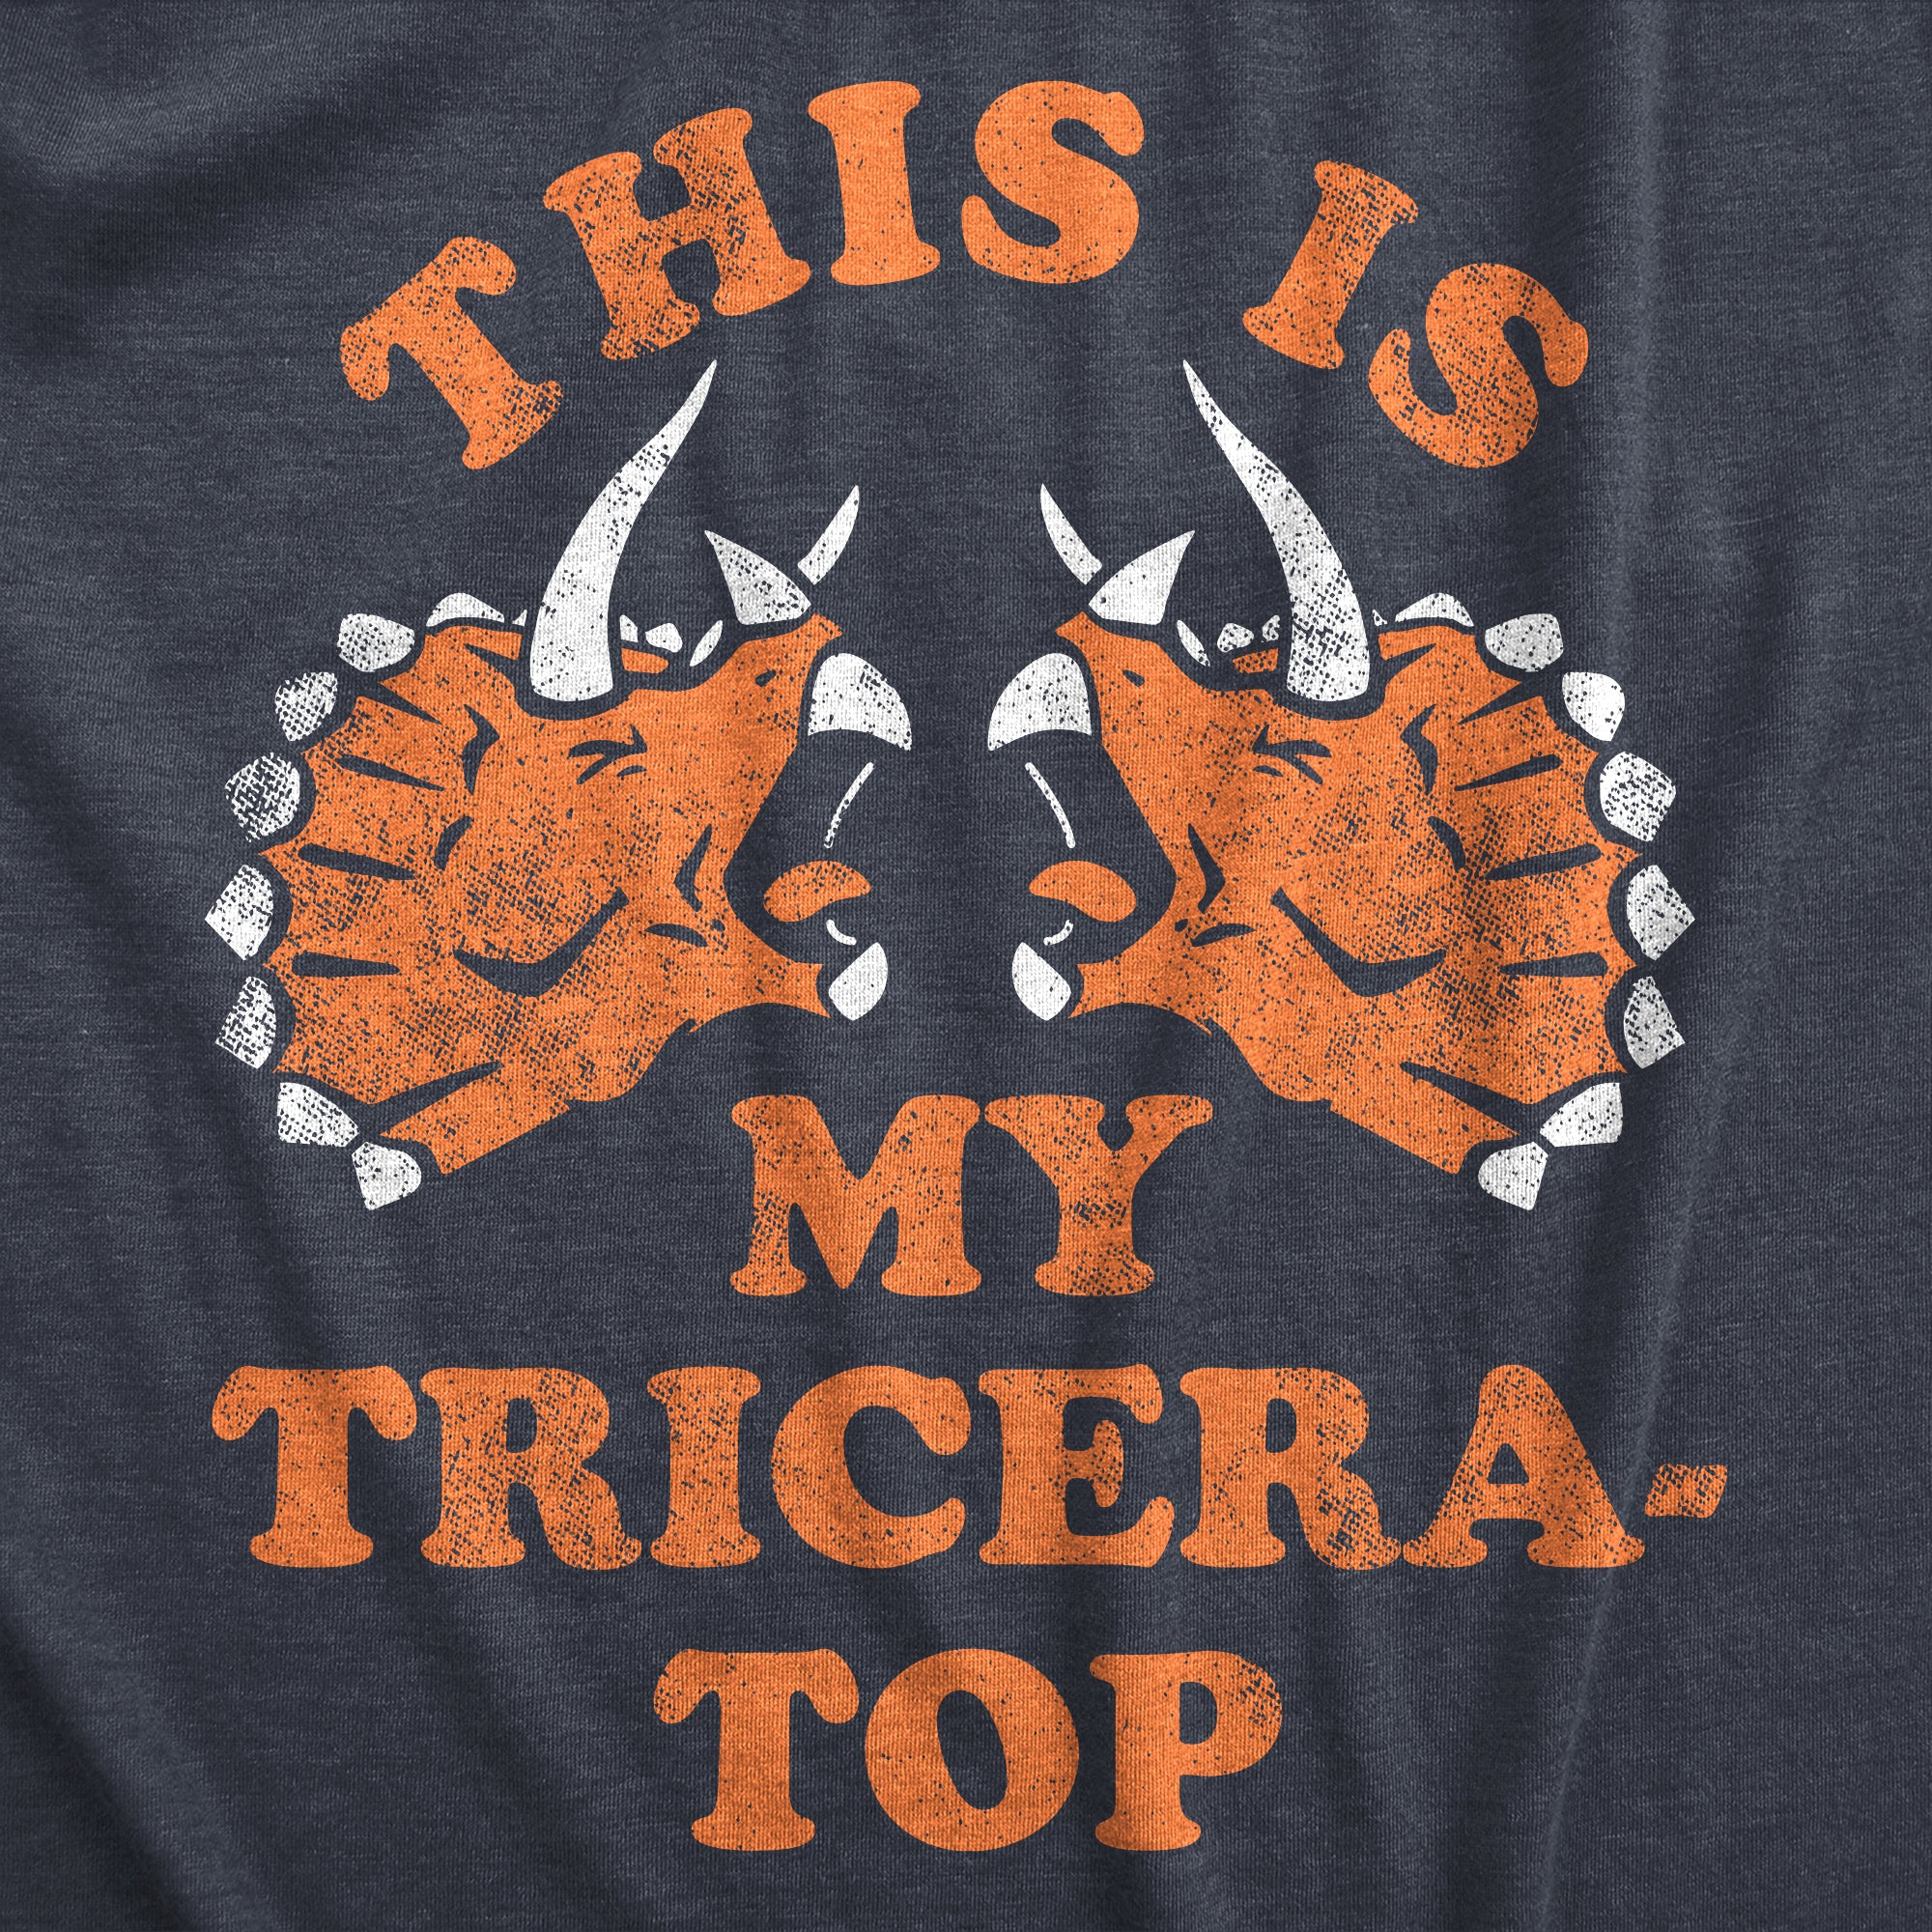 Funny Heather Navy - Tricera Top This Is My Tricera Top Mens T Shirt Nerdy Sarcastic Tee